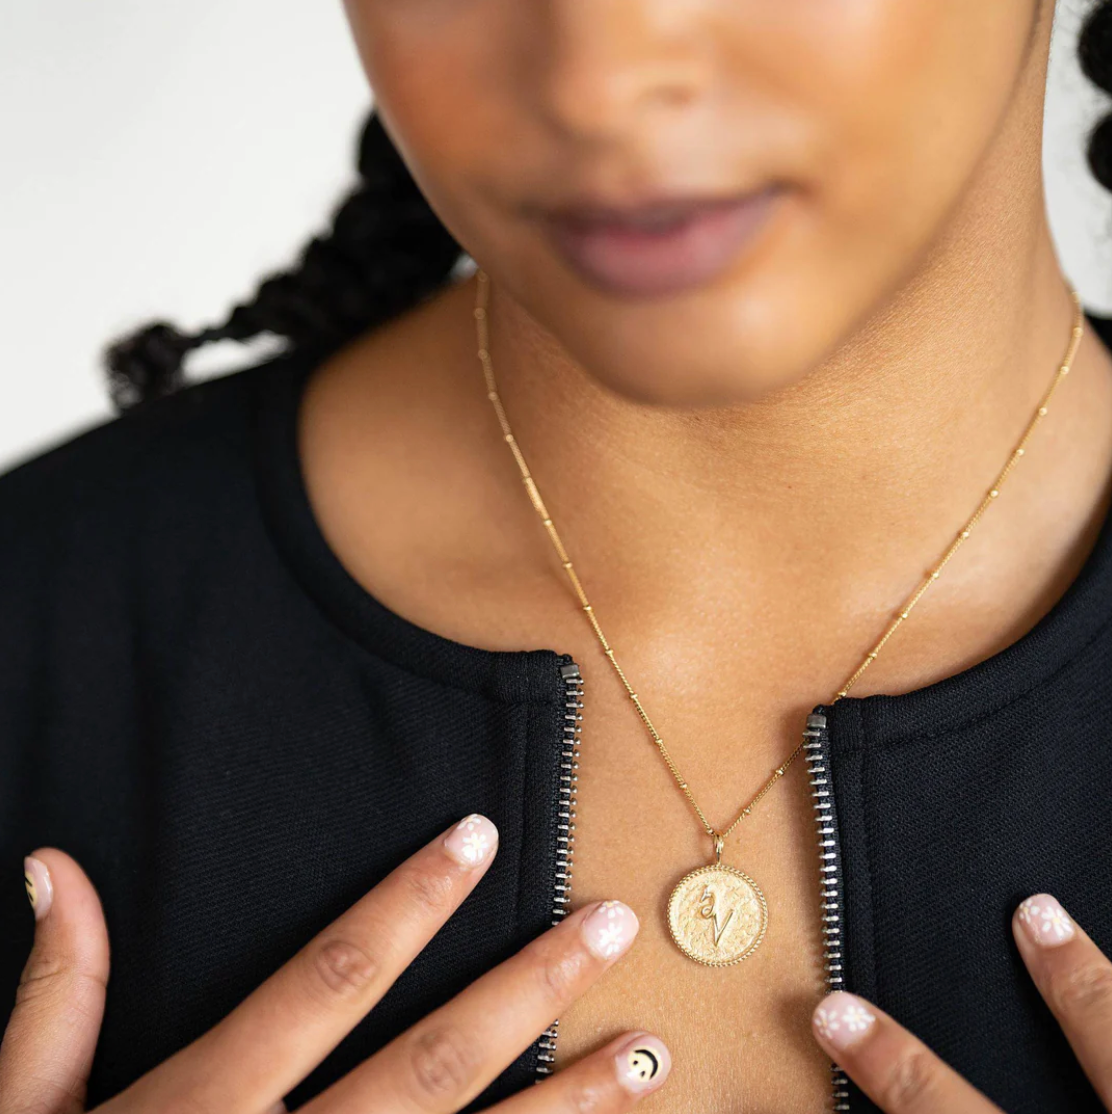 CLAIRE HILL DESIGNS "INSPIRE" SHORTHAND COIN NECKLACE